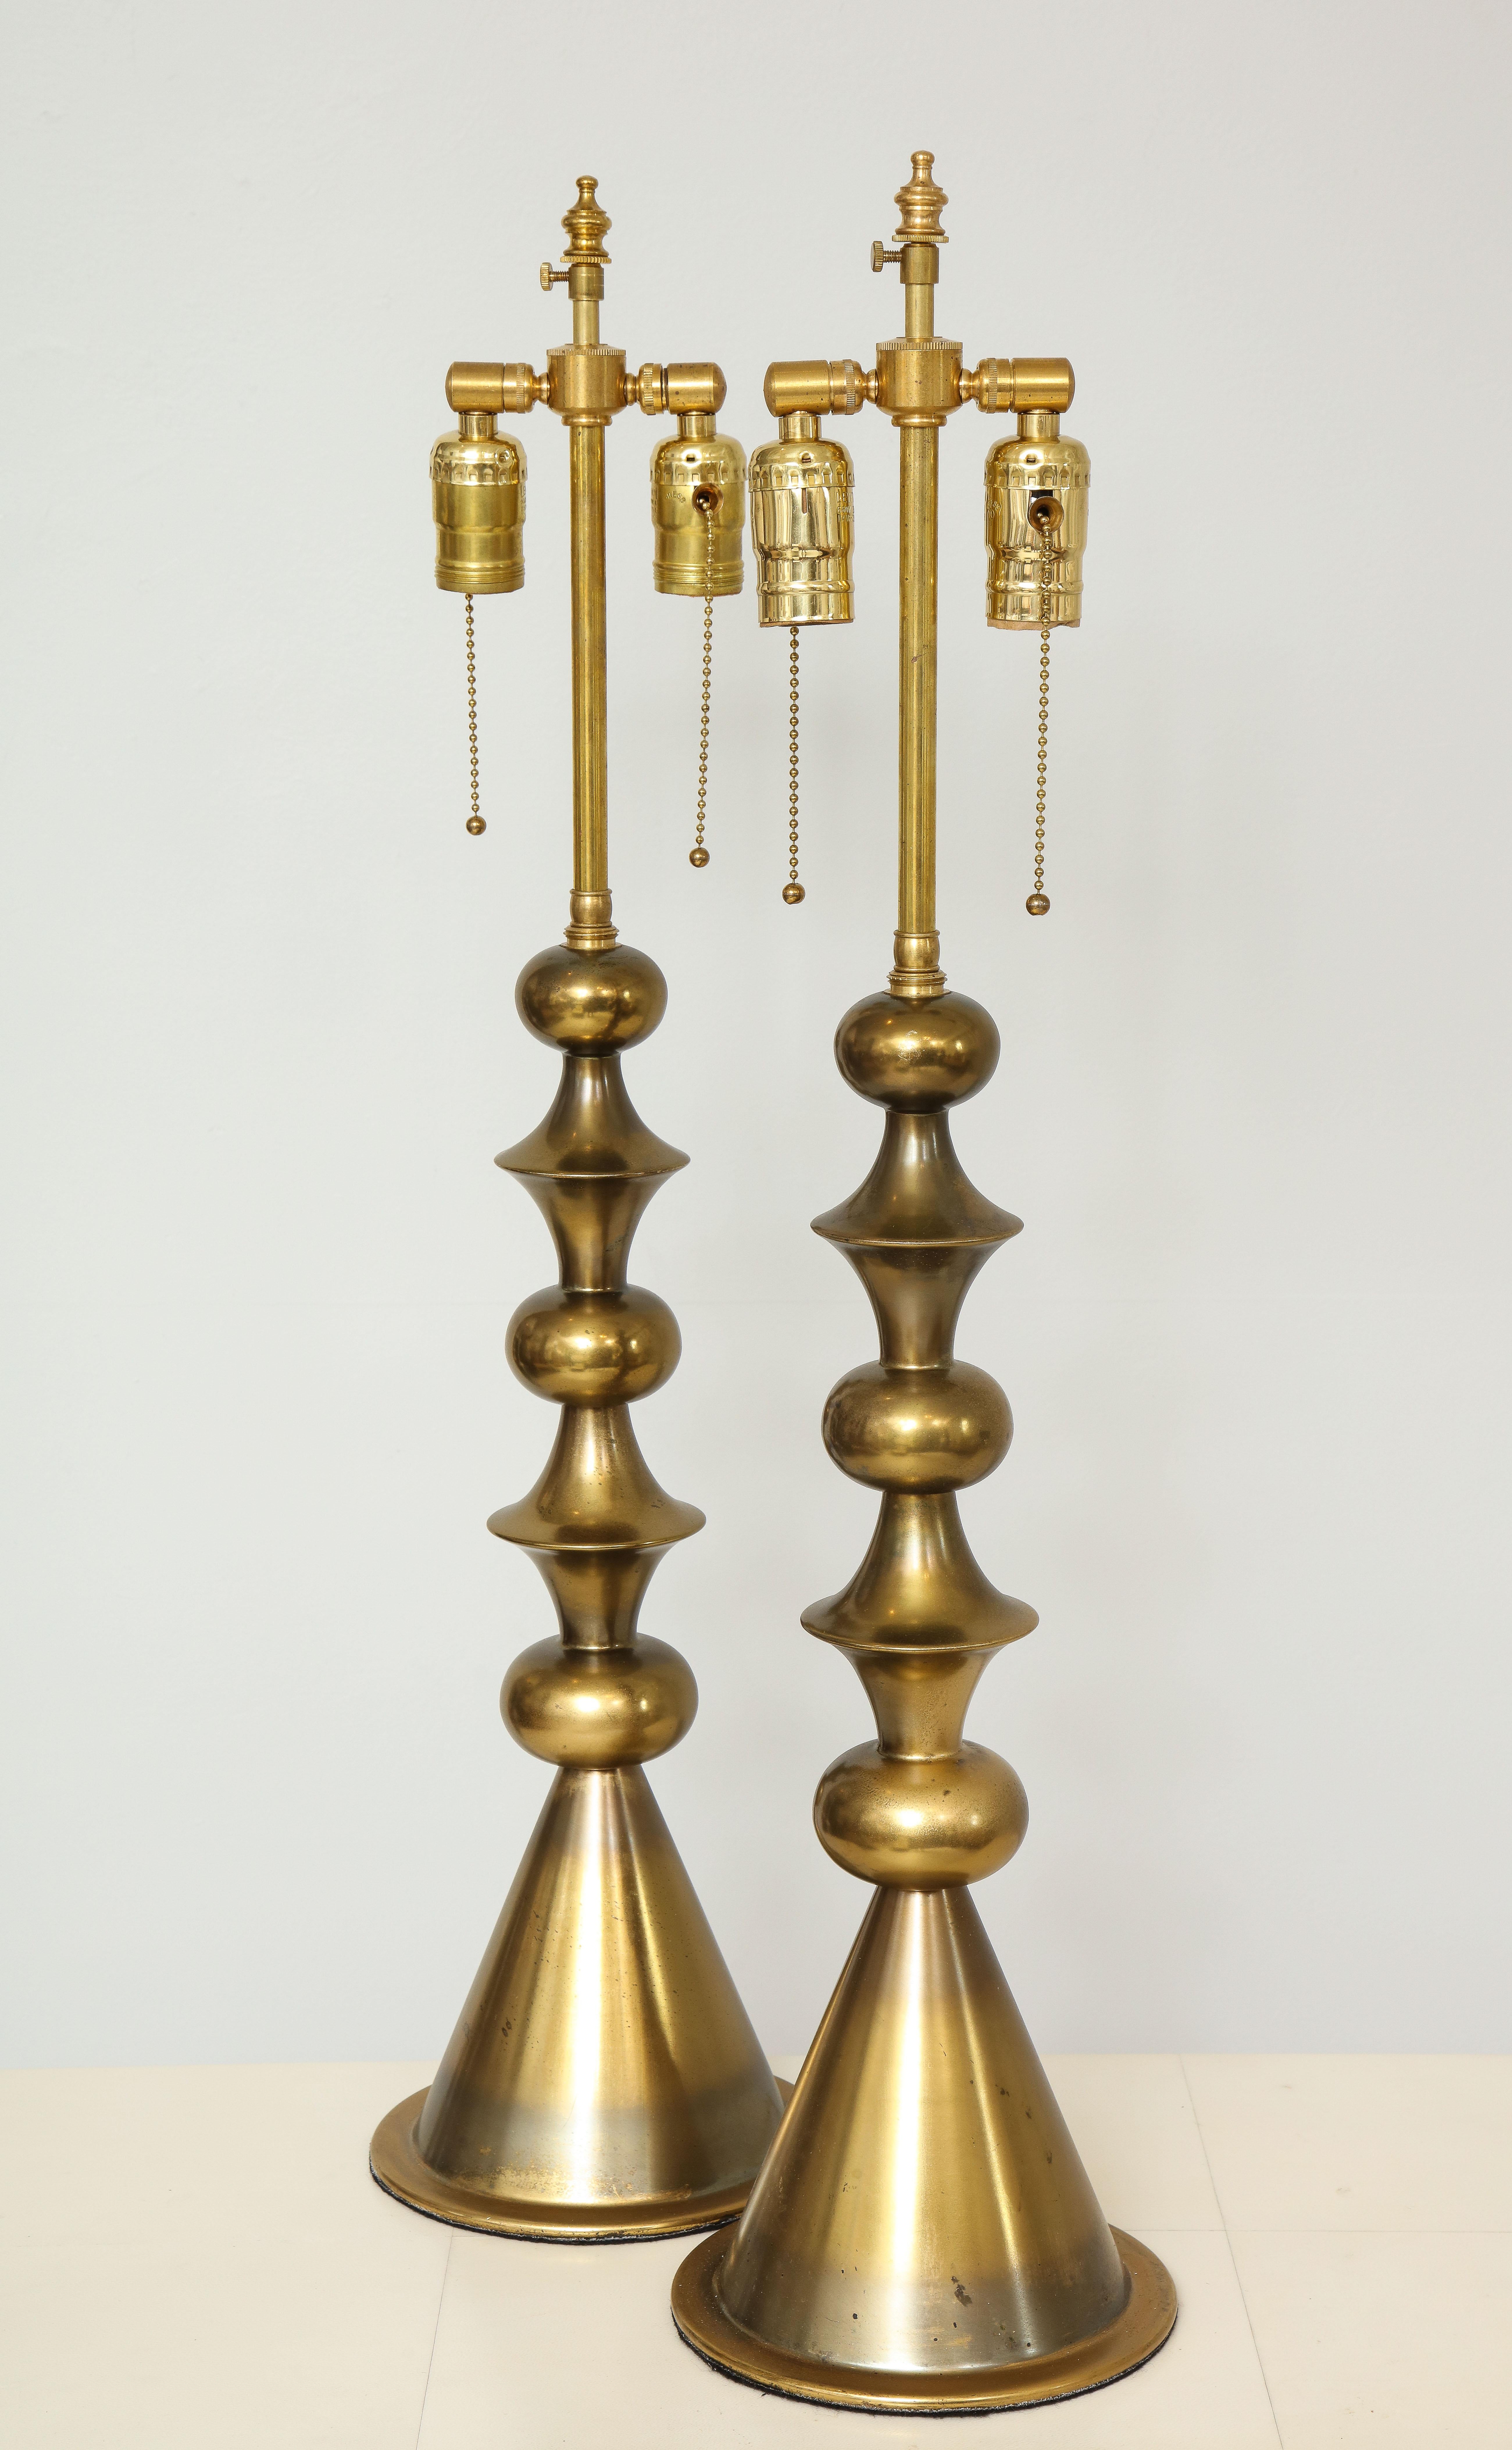 20th Century Pair of Mid-Century Modern Brass Table Lamps in the Manner of Tommi Parzinger